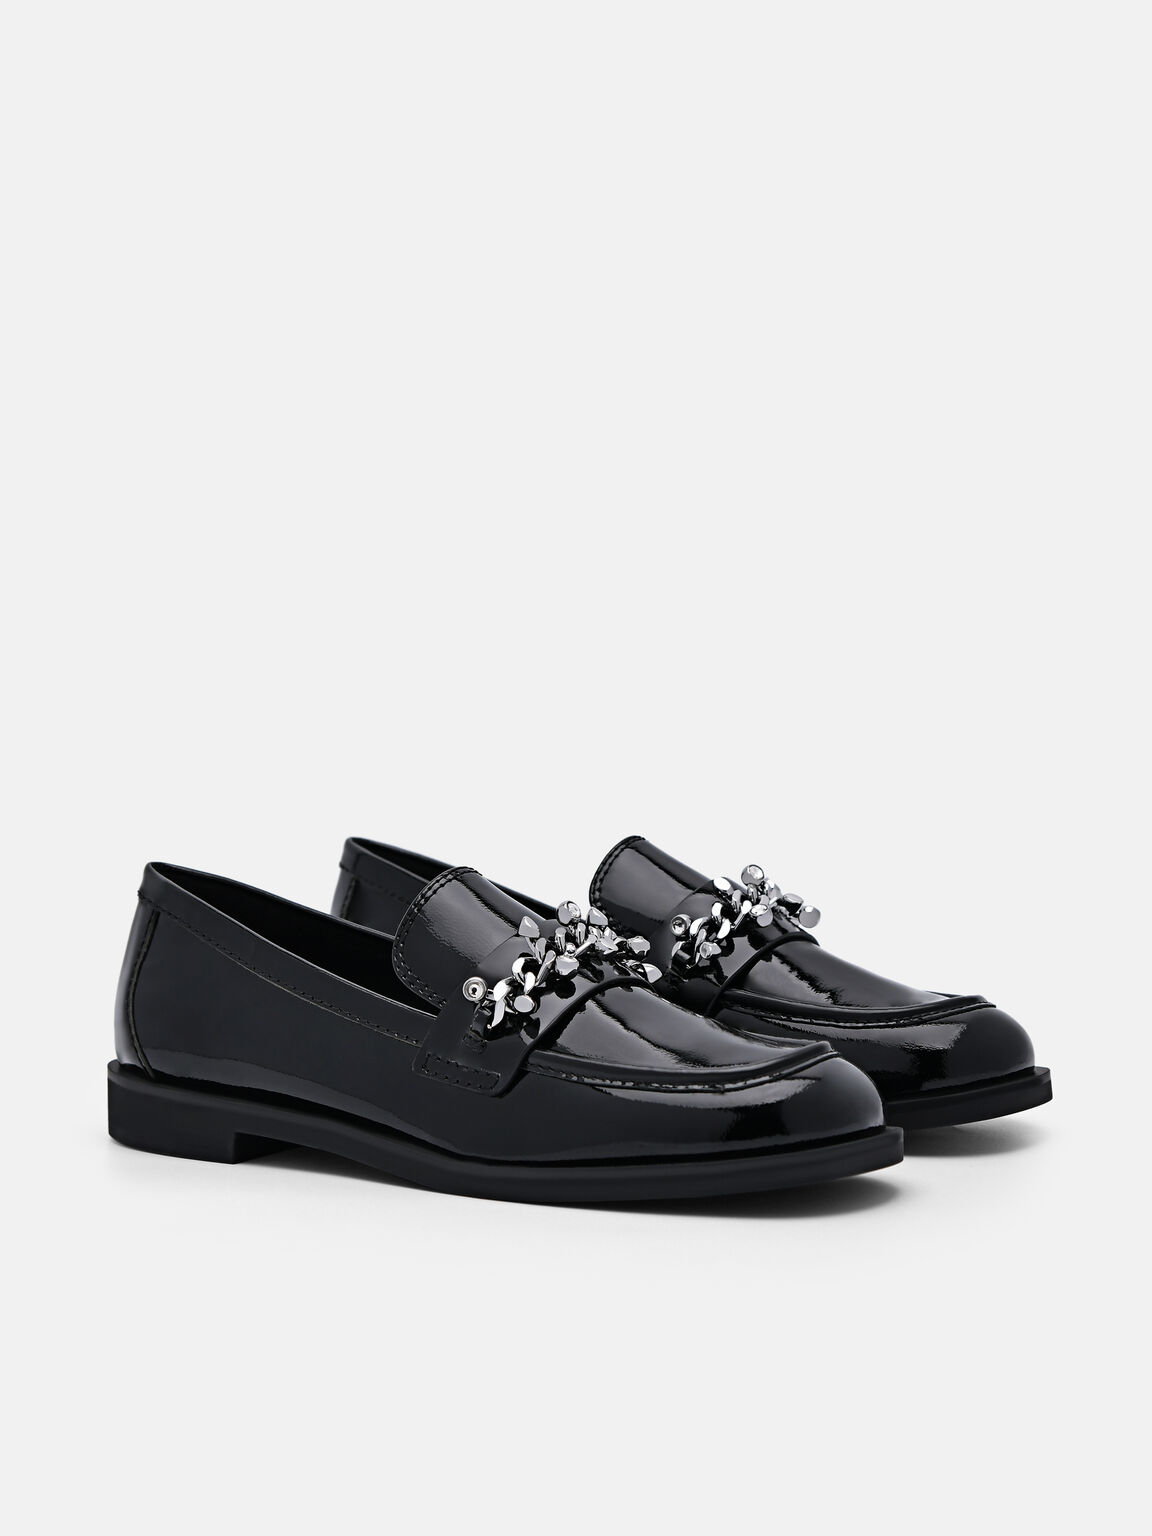 Cami Leather Loafers, Black, hi-res